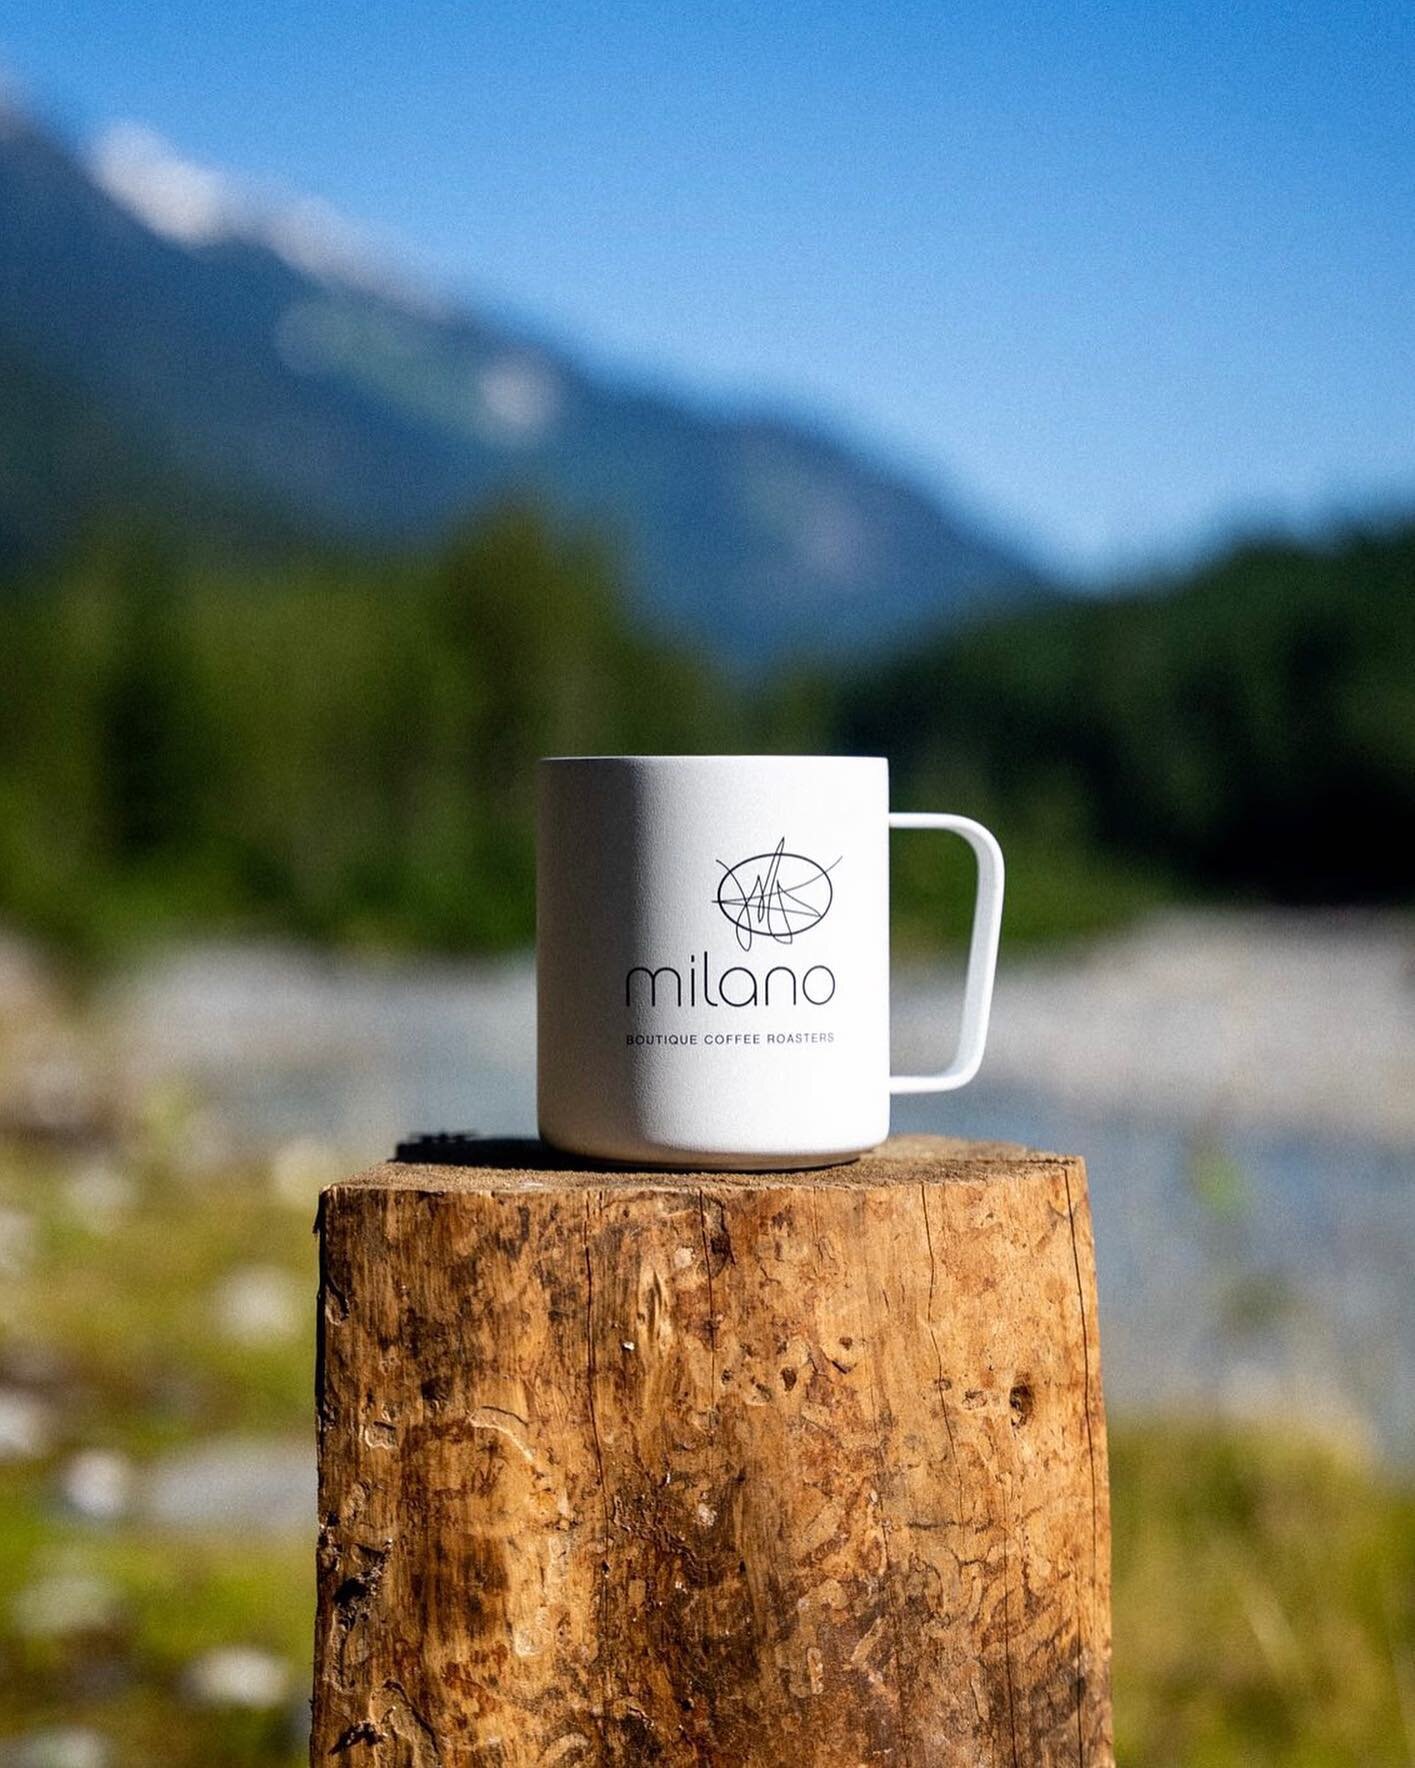 Enjoy the last long weekend of Summer with Milano coffee by your side! 💛☀️

.
.
.

#milanocoffee #vancouvercoffee #yvrcoffee #milanoroasters #supportlocal